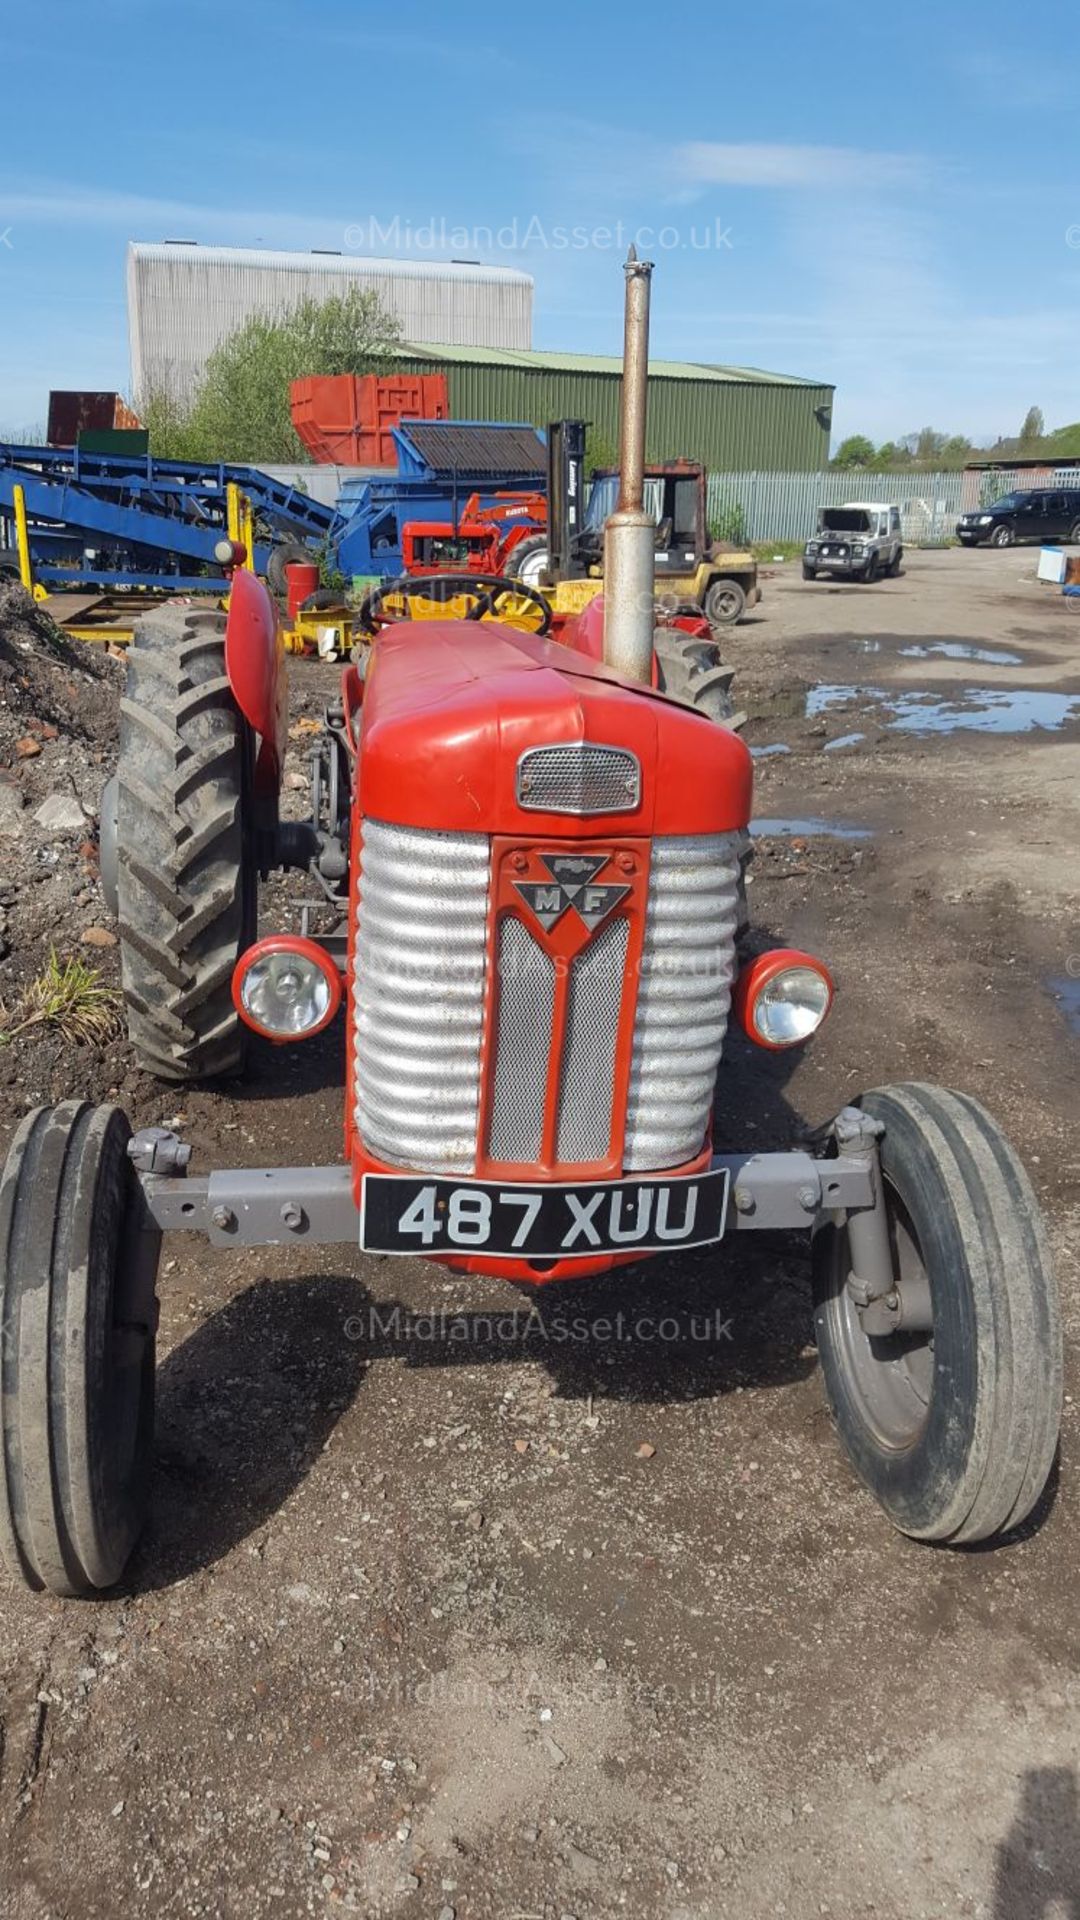 1959 MASSEY FERGUSON 65 DIESEL TRACTOR. STARTS, DRIVES AND PTO TURNS 2WD *NO VAT* - Image 4 of 10